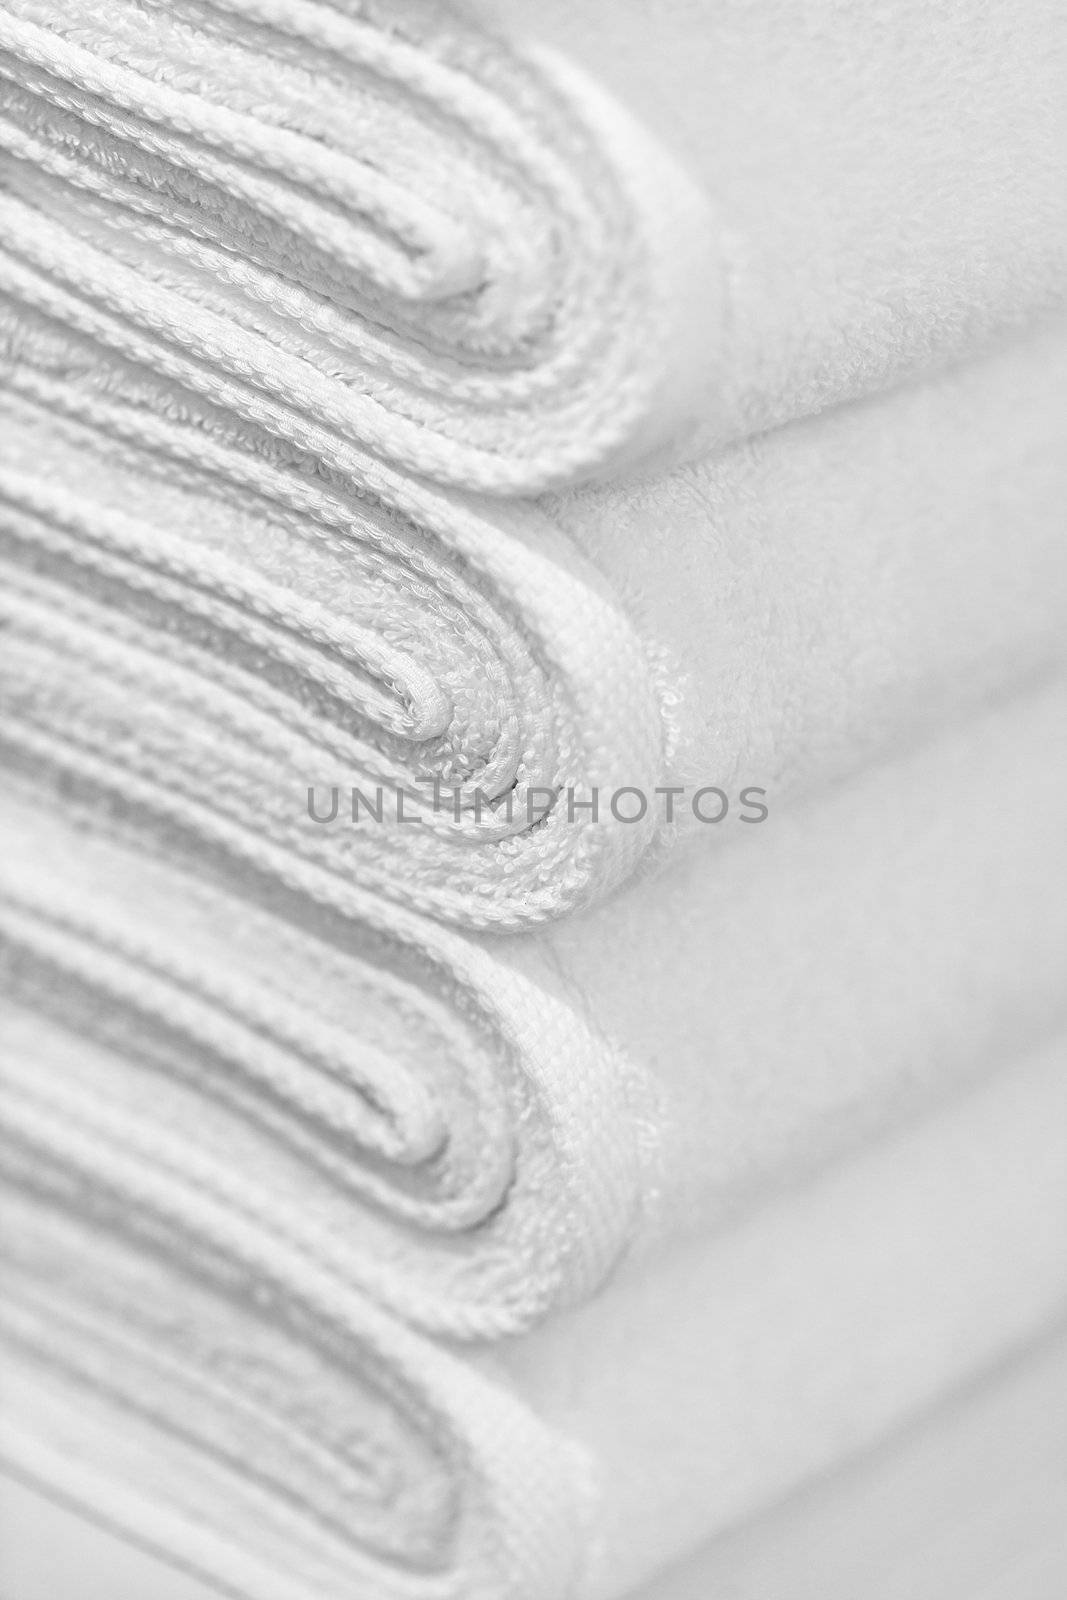 Stack of new white towels close-up - background by pzaxe